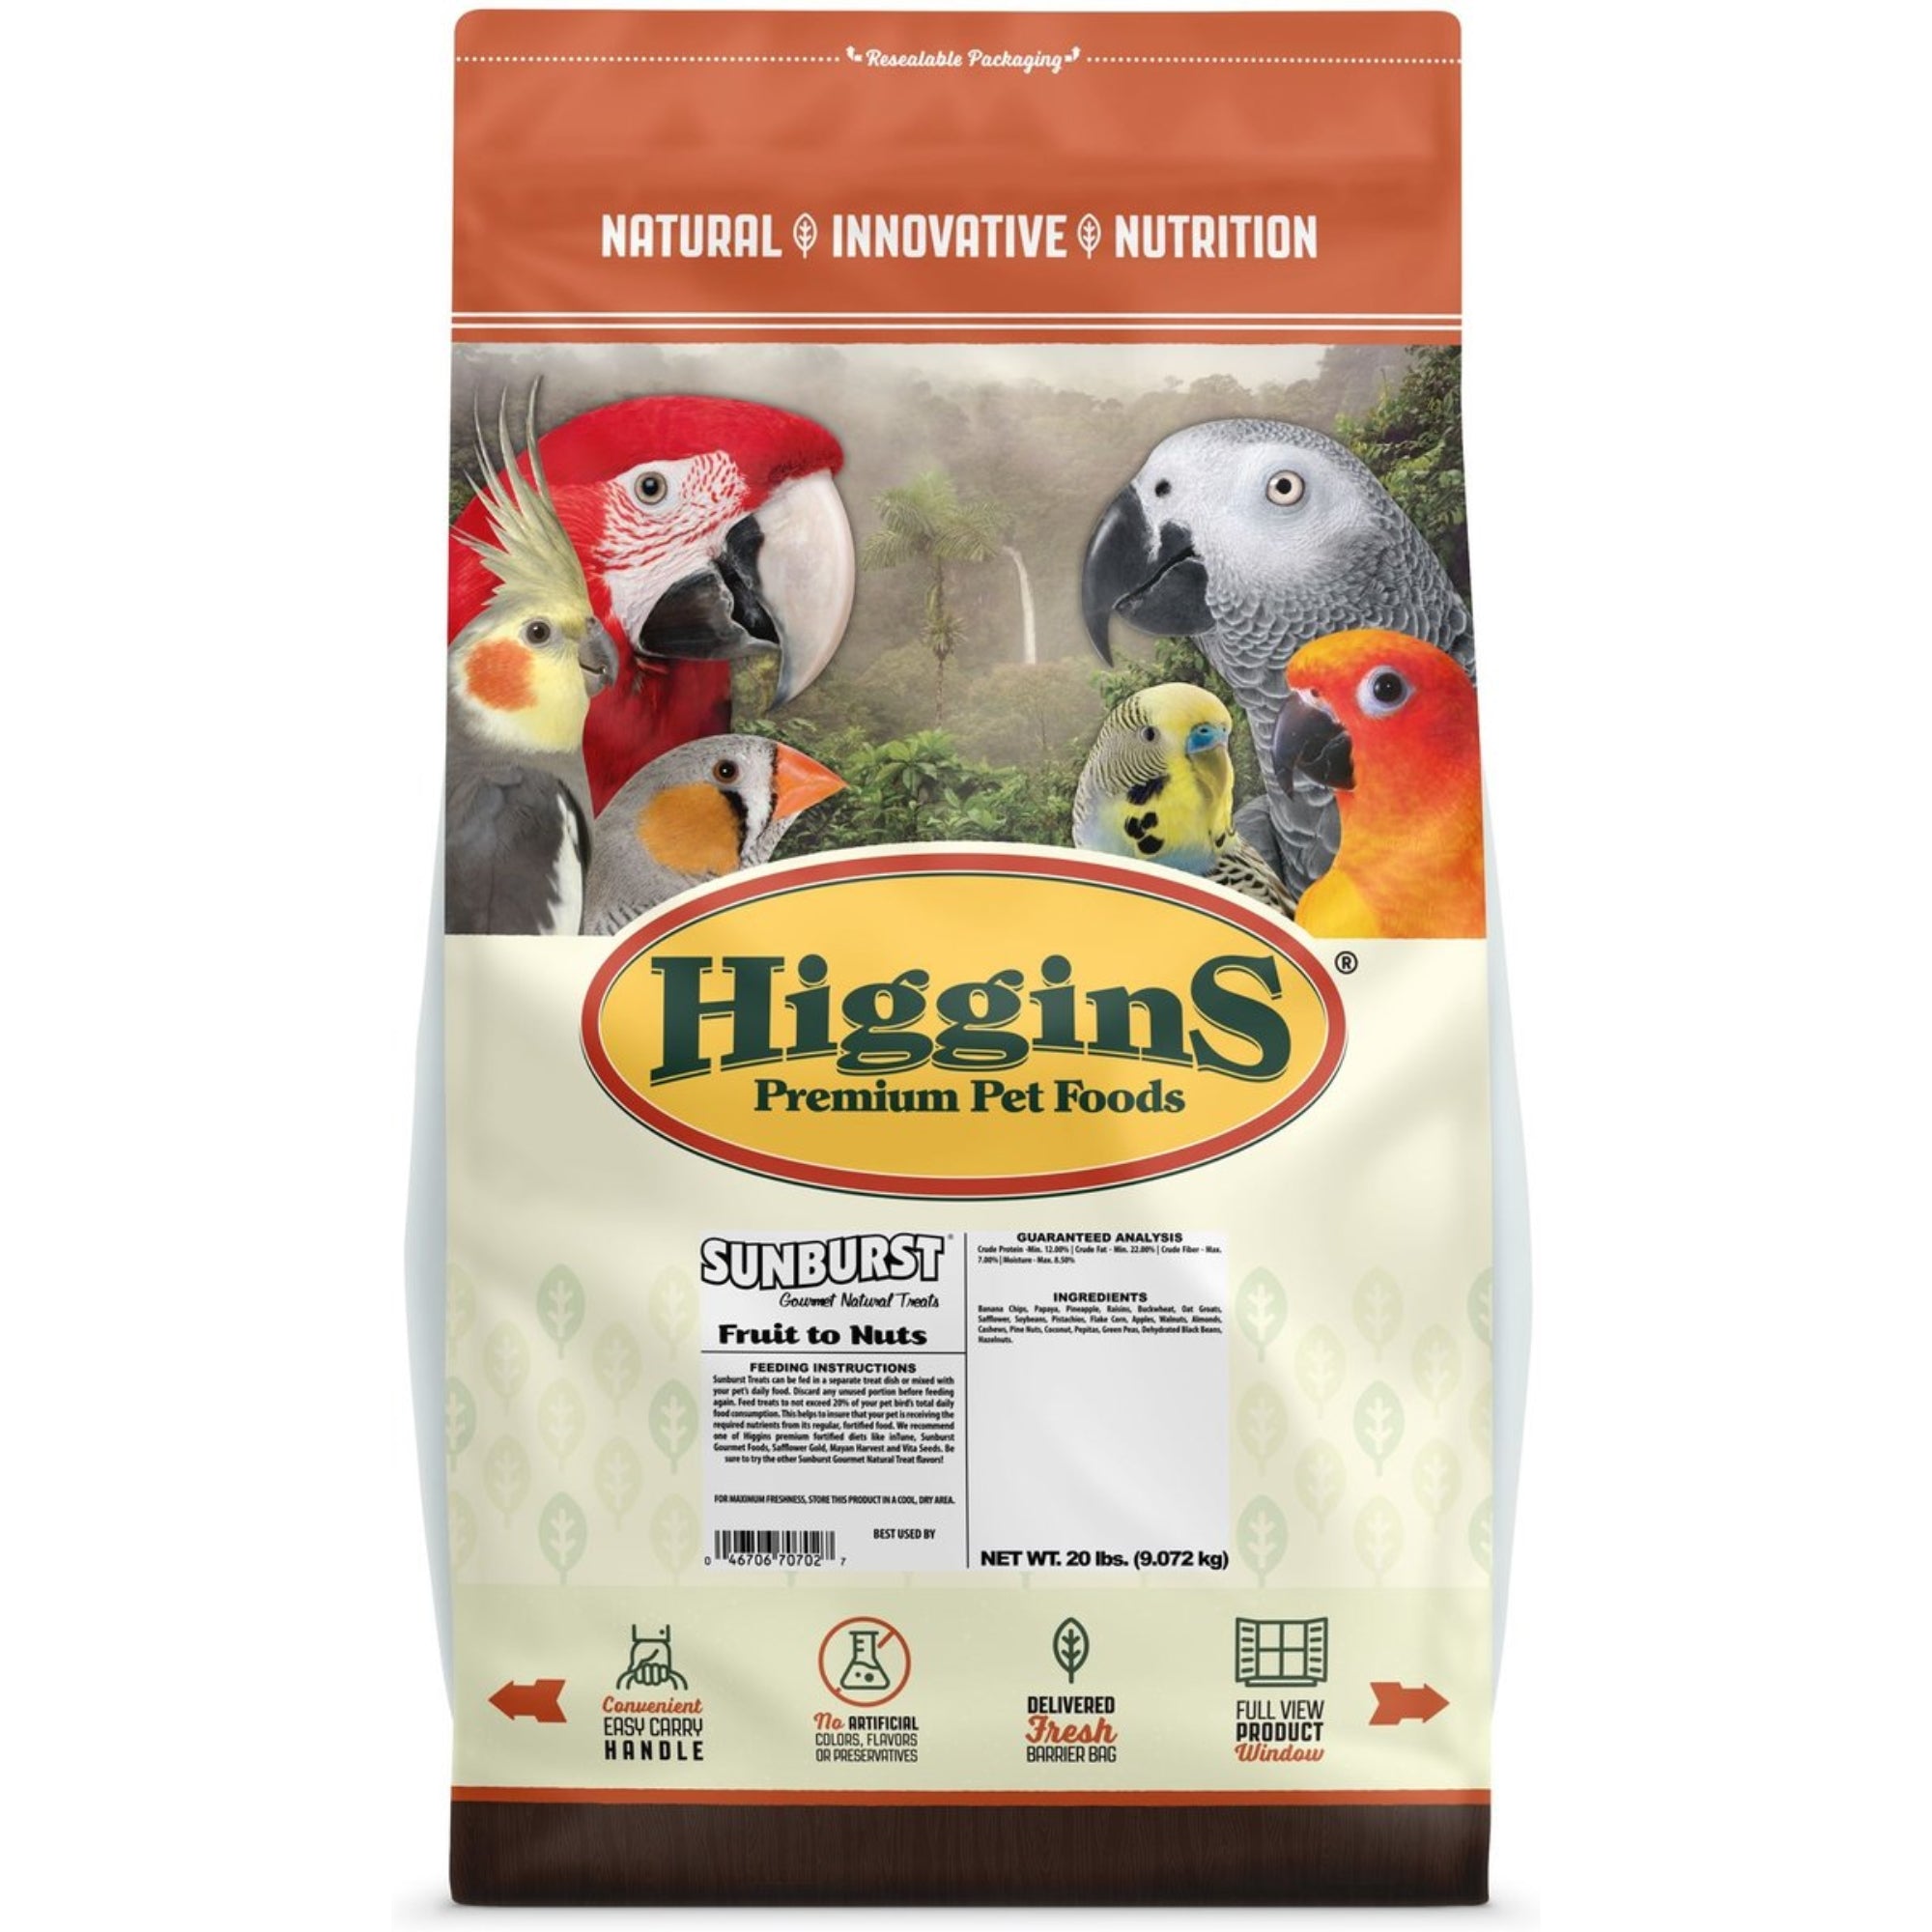 Higgins Sunburst Gourmet Bird Treats, Fruit to Nuts for Conures, Parrots, and Macaws, 20lbs